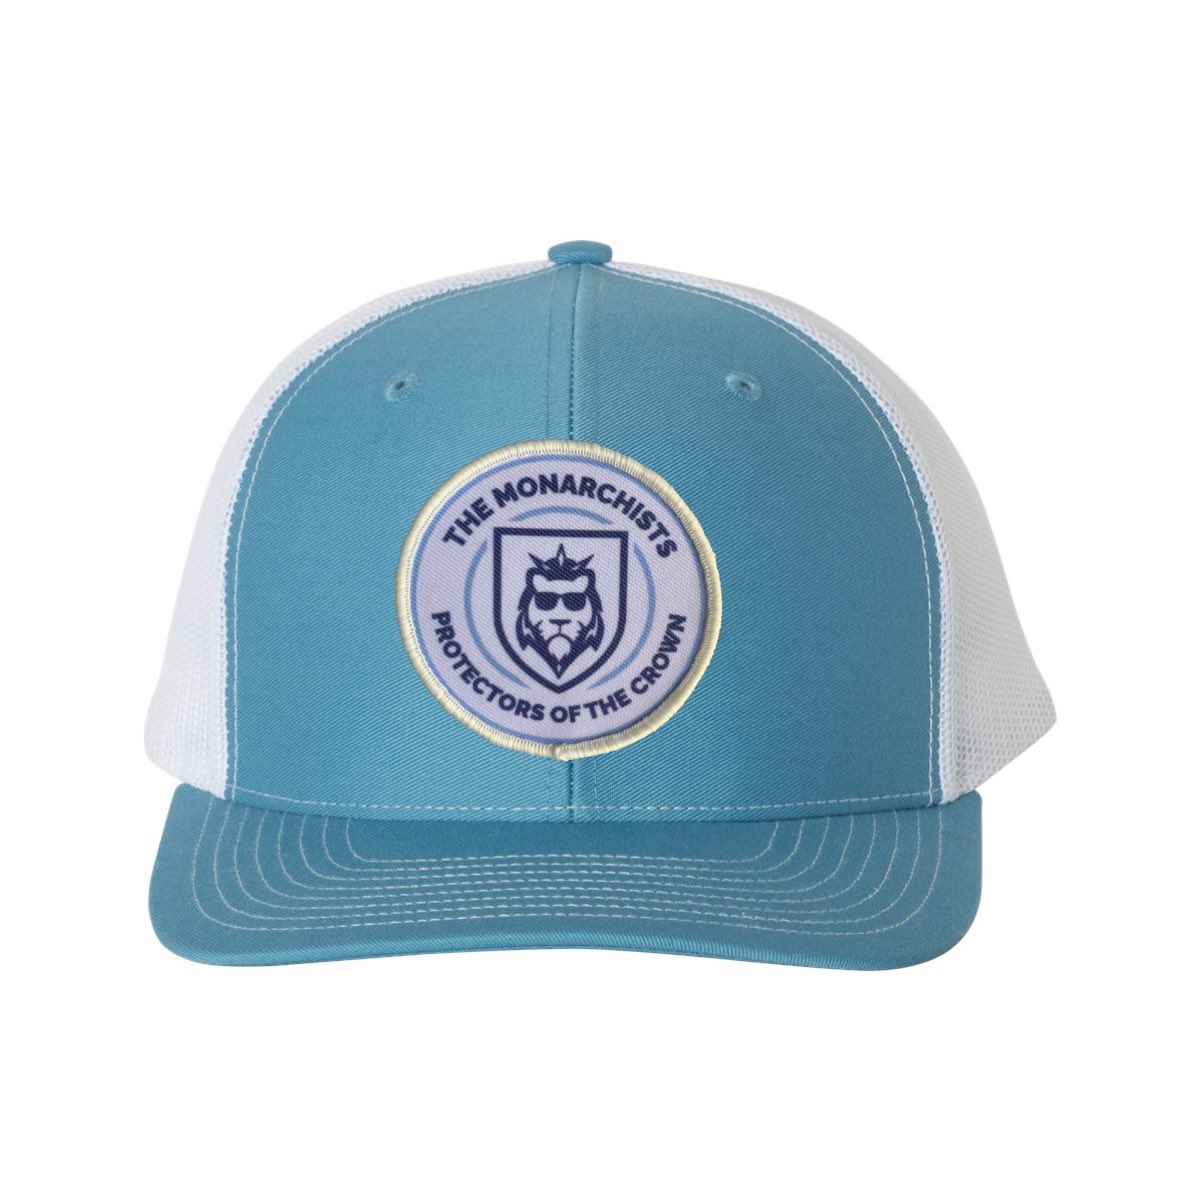 Y’all have been asking us for Monarchists hats and we finally have them. All proceeds are donated to support the student athletes of @ODUSports via @OldDominionAF and @prideofodunil  

This is a very limited run, so snag one while supplies last 👇 

odumonarchists.com/store/